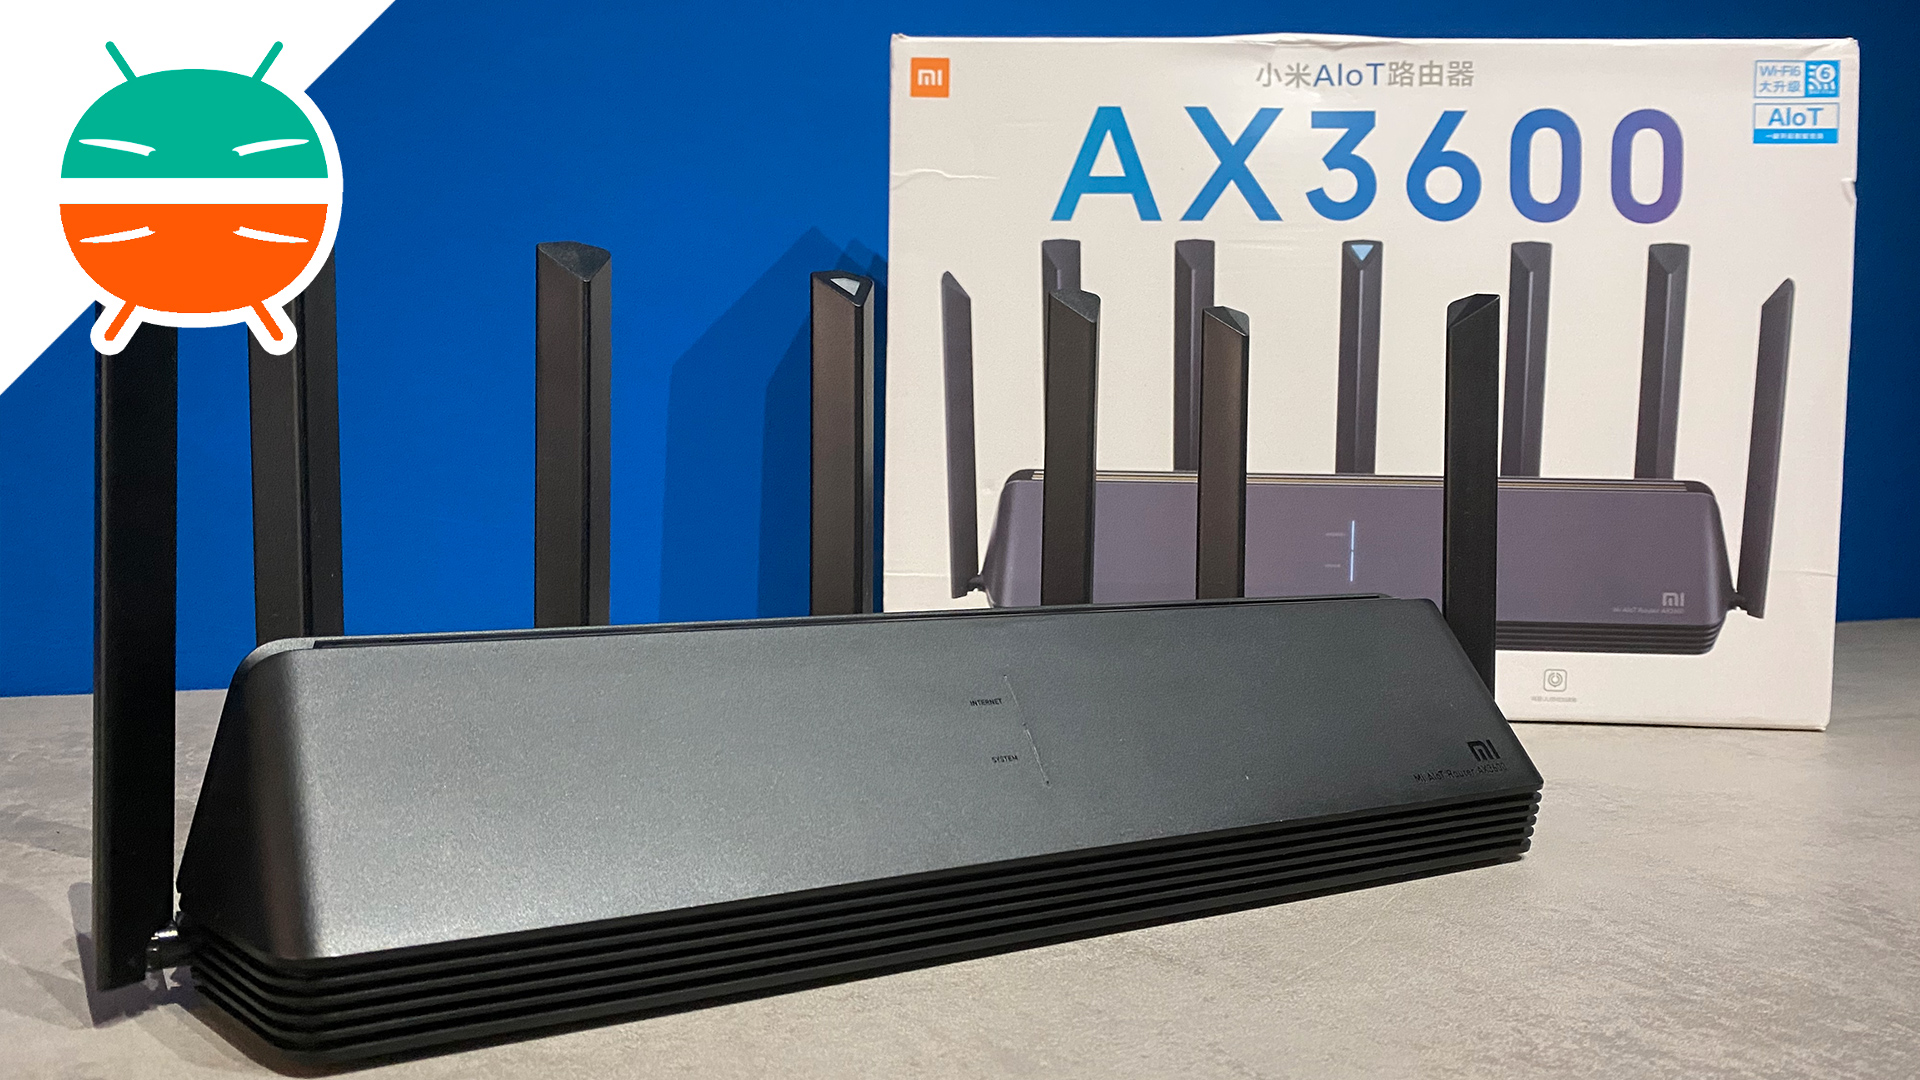 Tear safety Habubu Xiaomi AIoT AX3600 review, the Qualcomm WiFi 6 router is FAST and POWERFUL  - GizChina.it